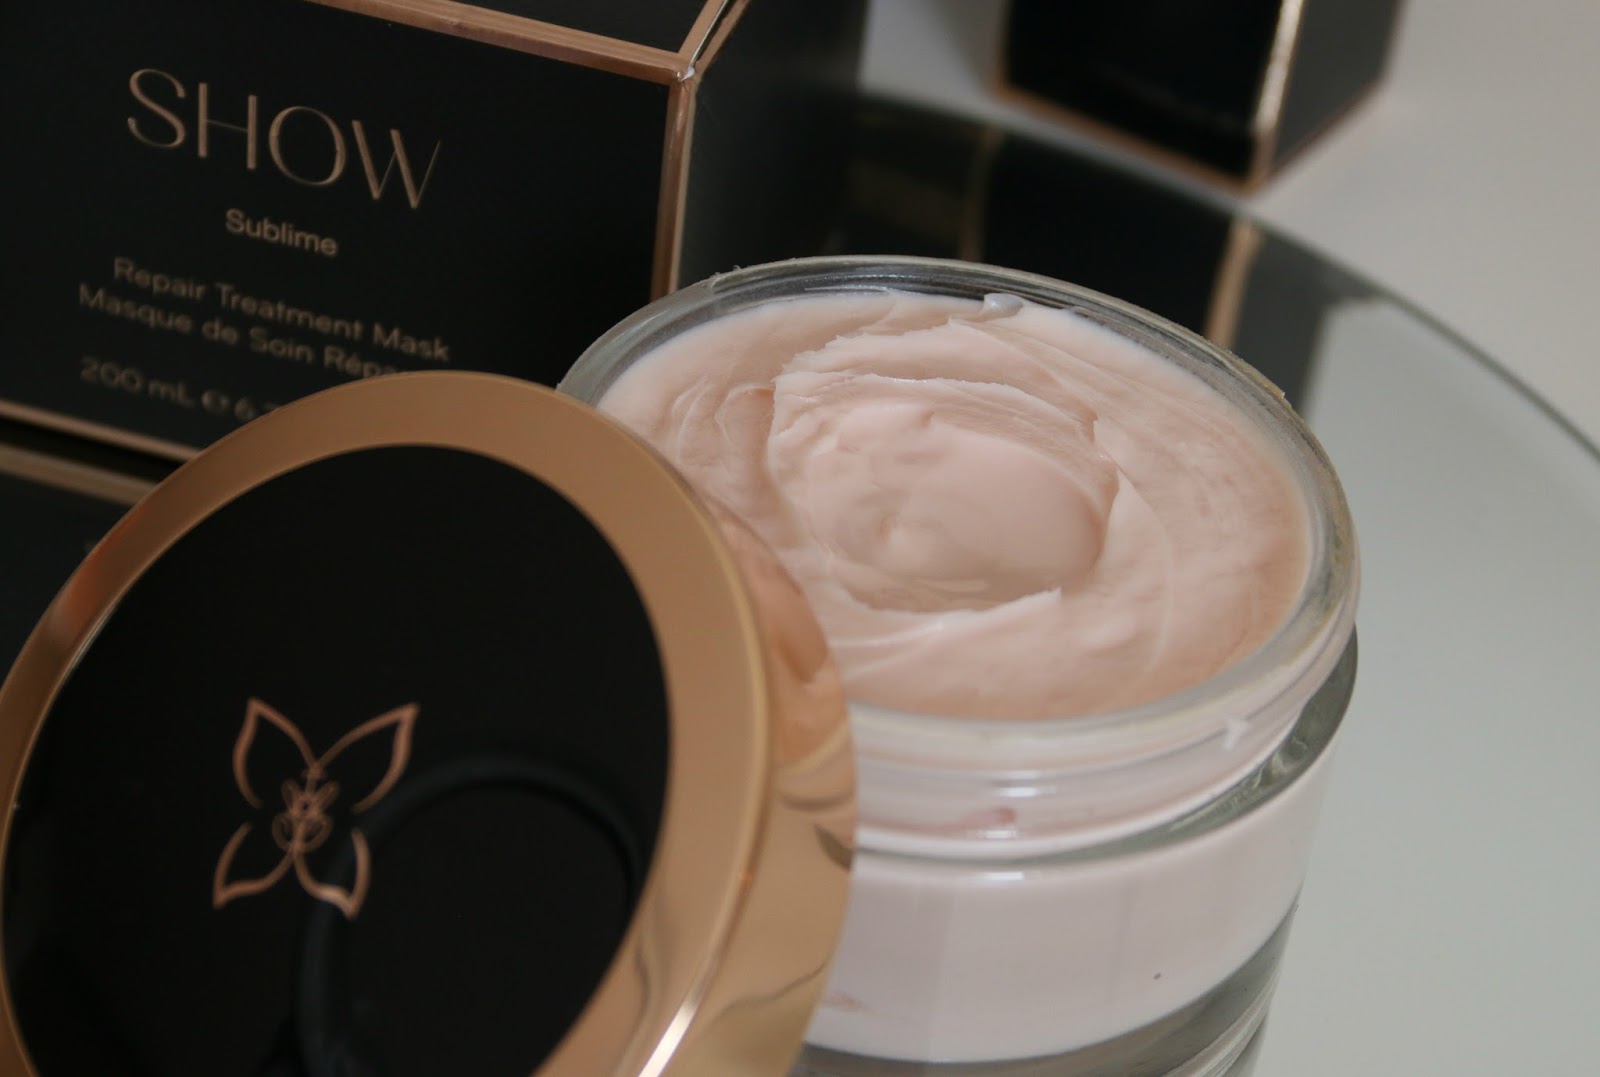 SHOW Beauty Product Review by UK Beauty Blogger WhatLauraLoves